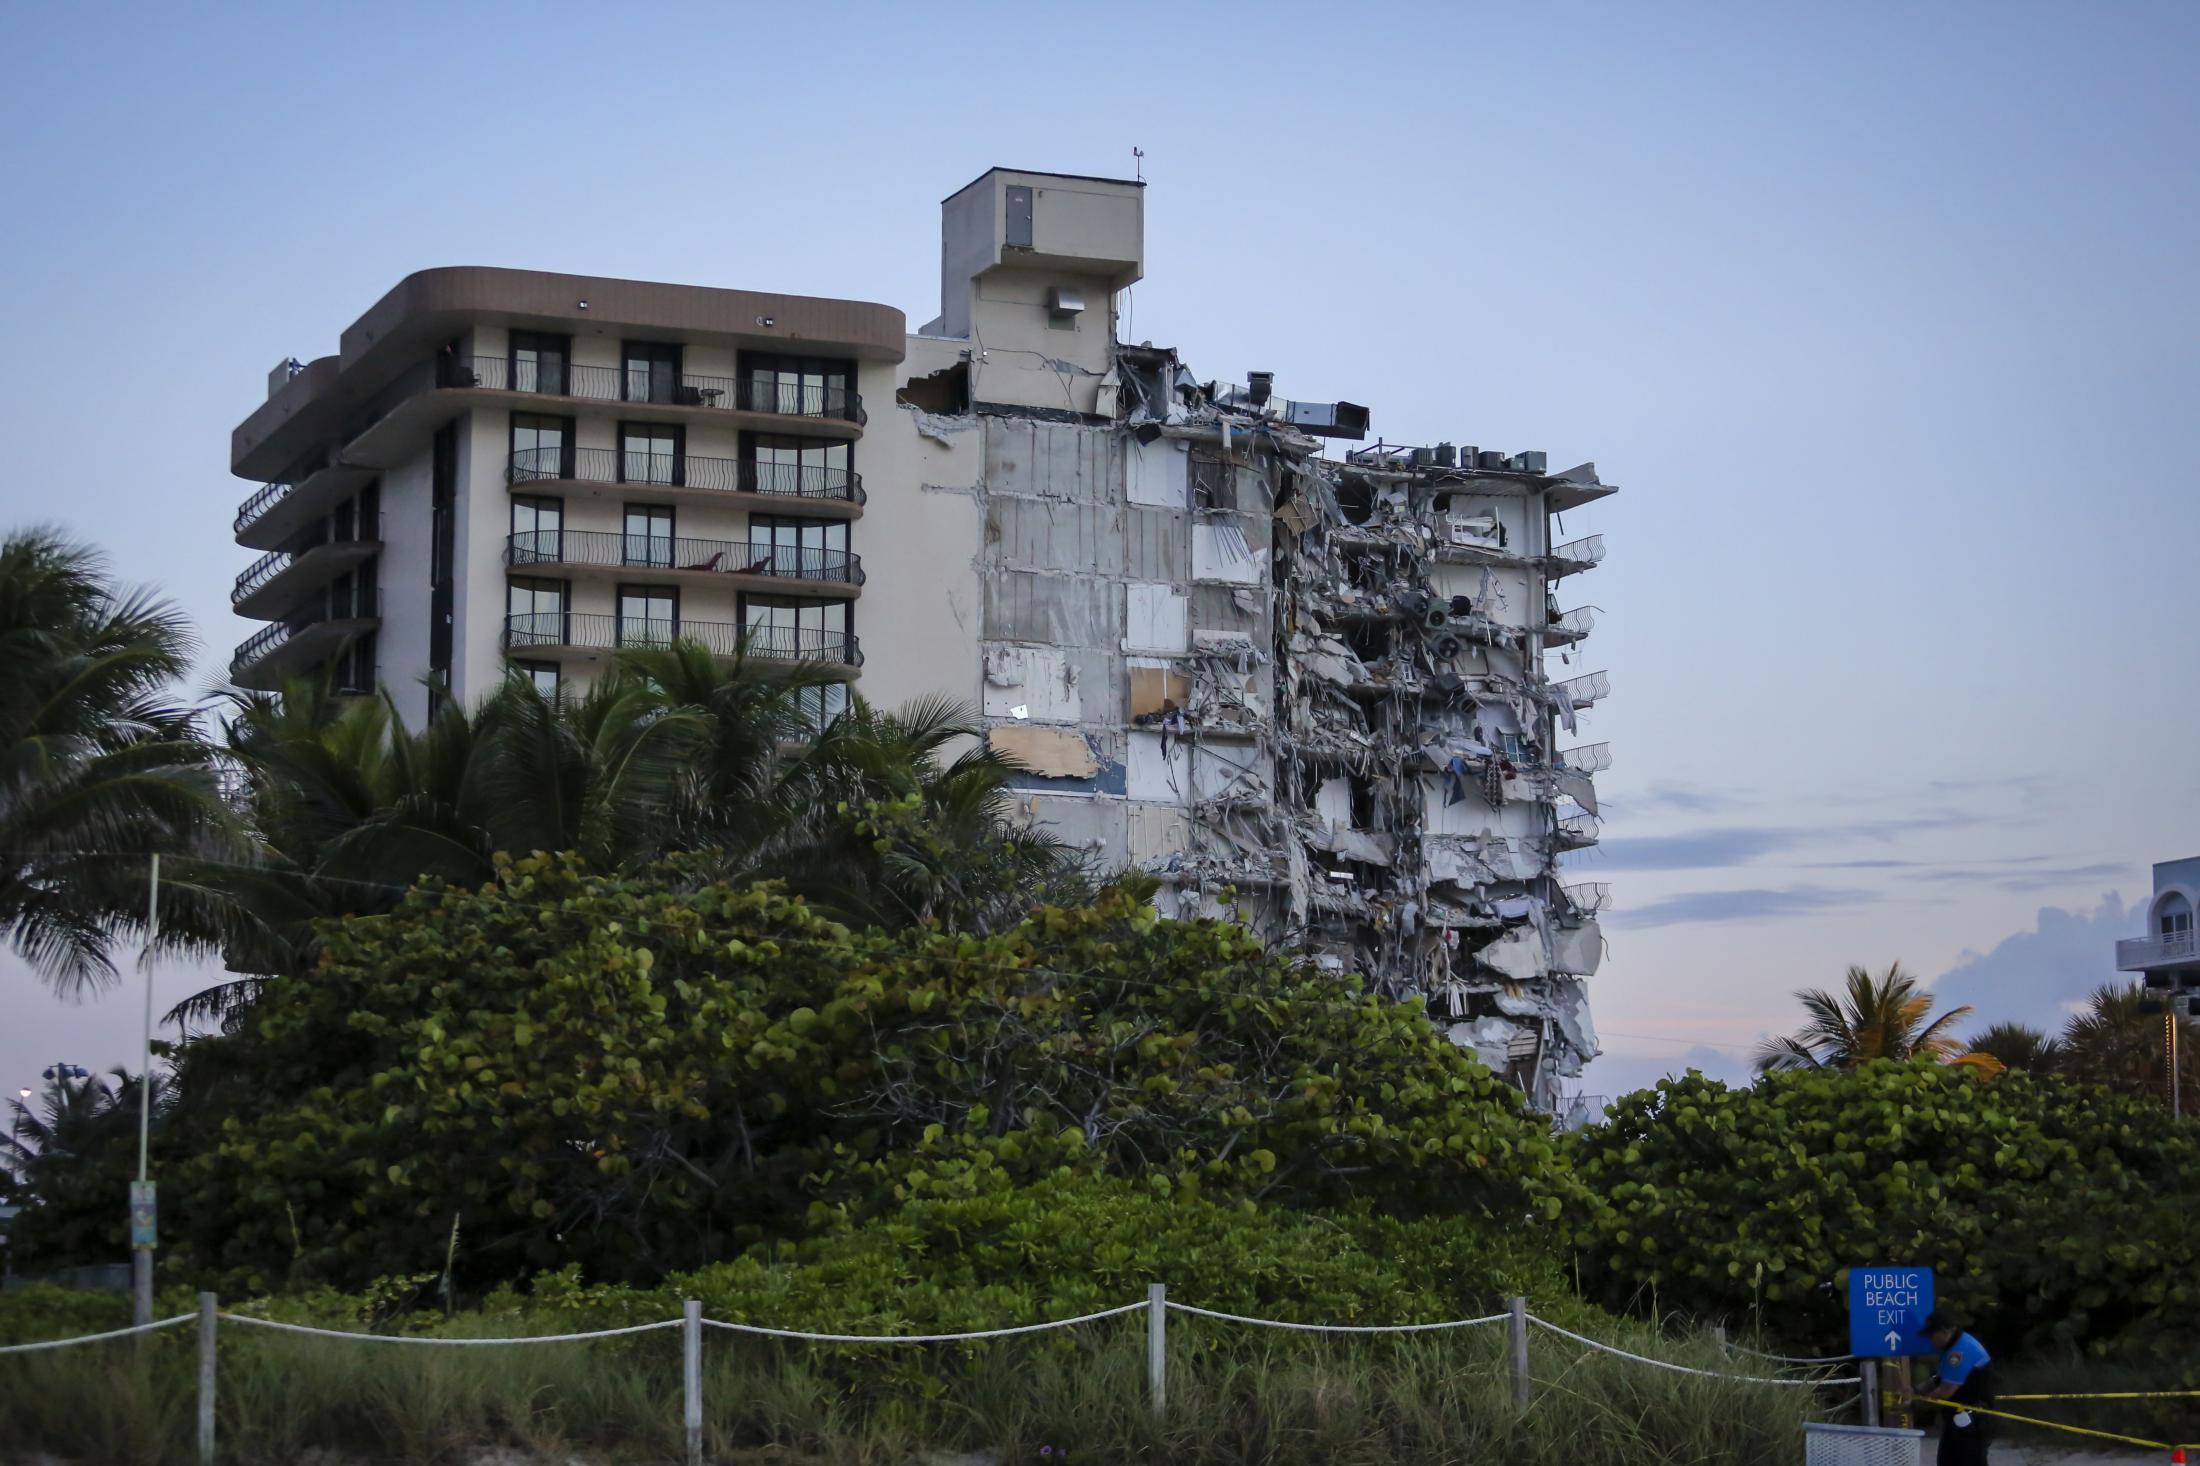 2021 - Surfside building collapsed - Champlain Tower partially collapsed in Surfside, Florida,...